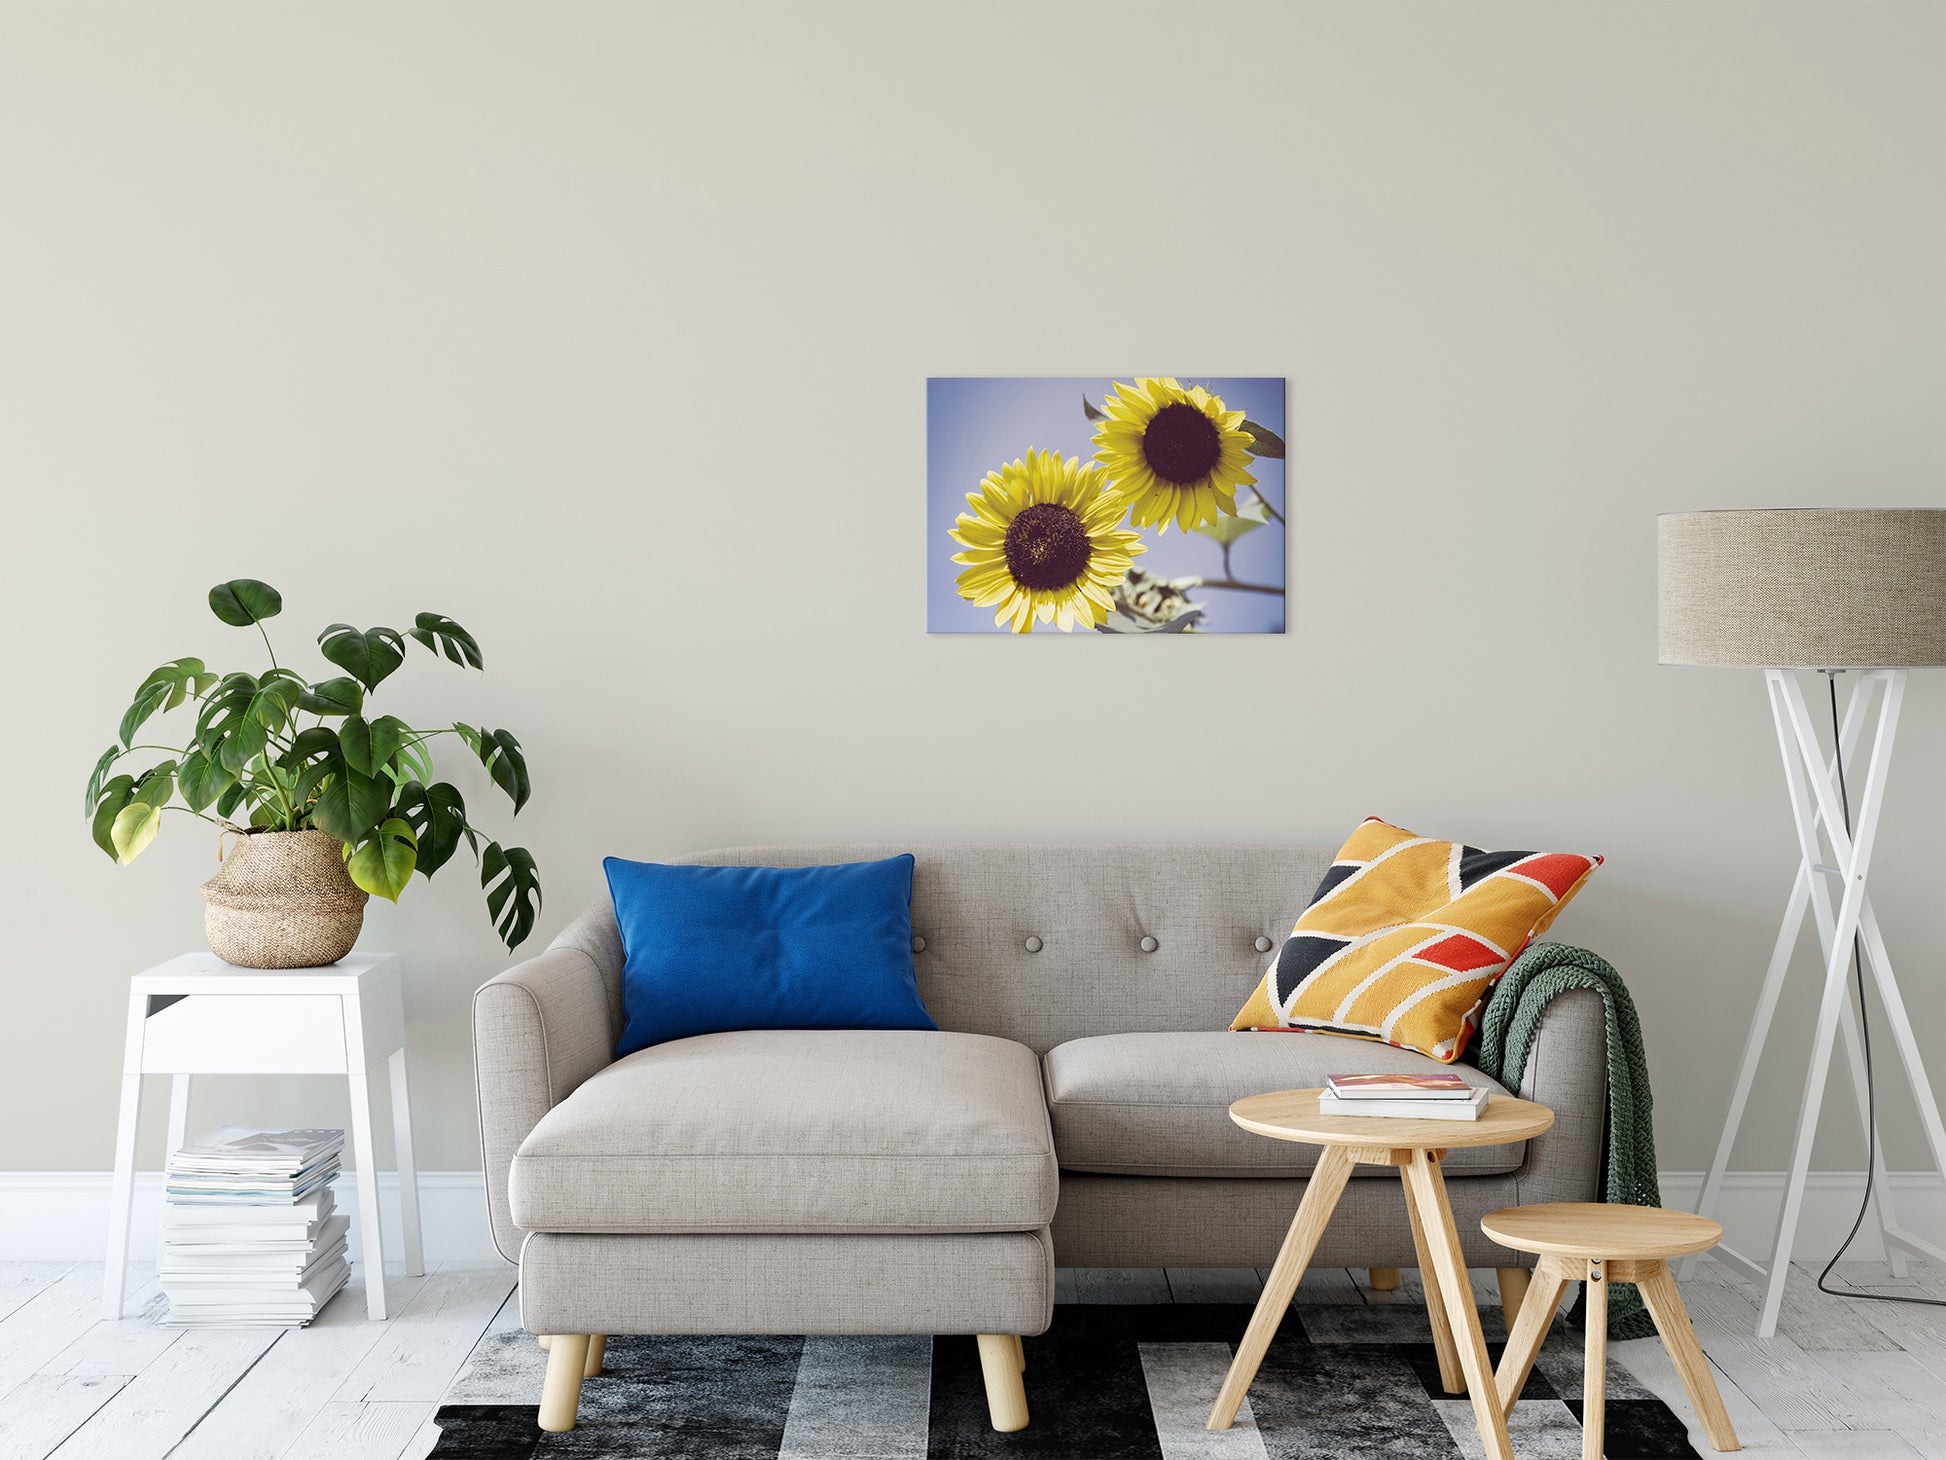 Yellow Flower Wall Art: Aged Sunflowers Against Sky Floral / Nature Fine Art Canvas Wall Art Prints 16" x 20" - PIPAFINEART